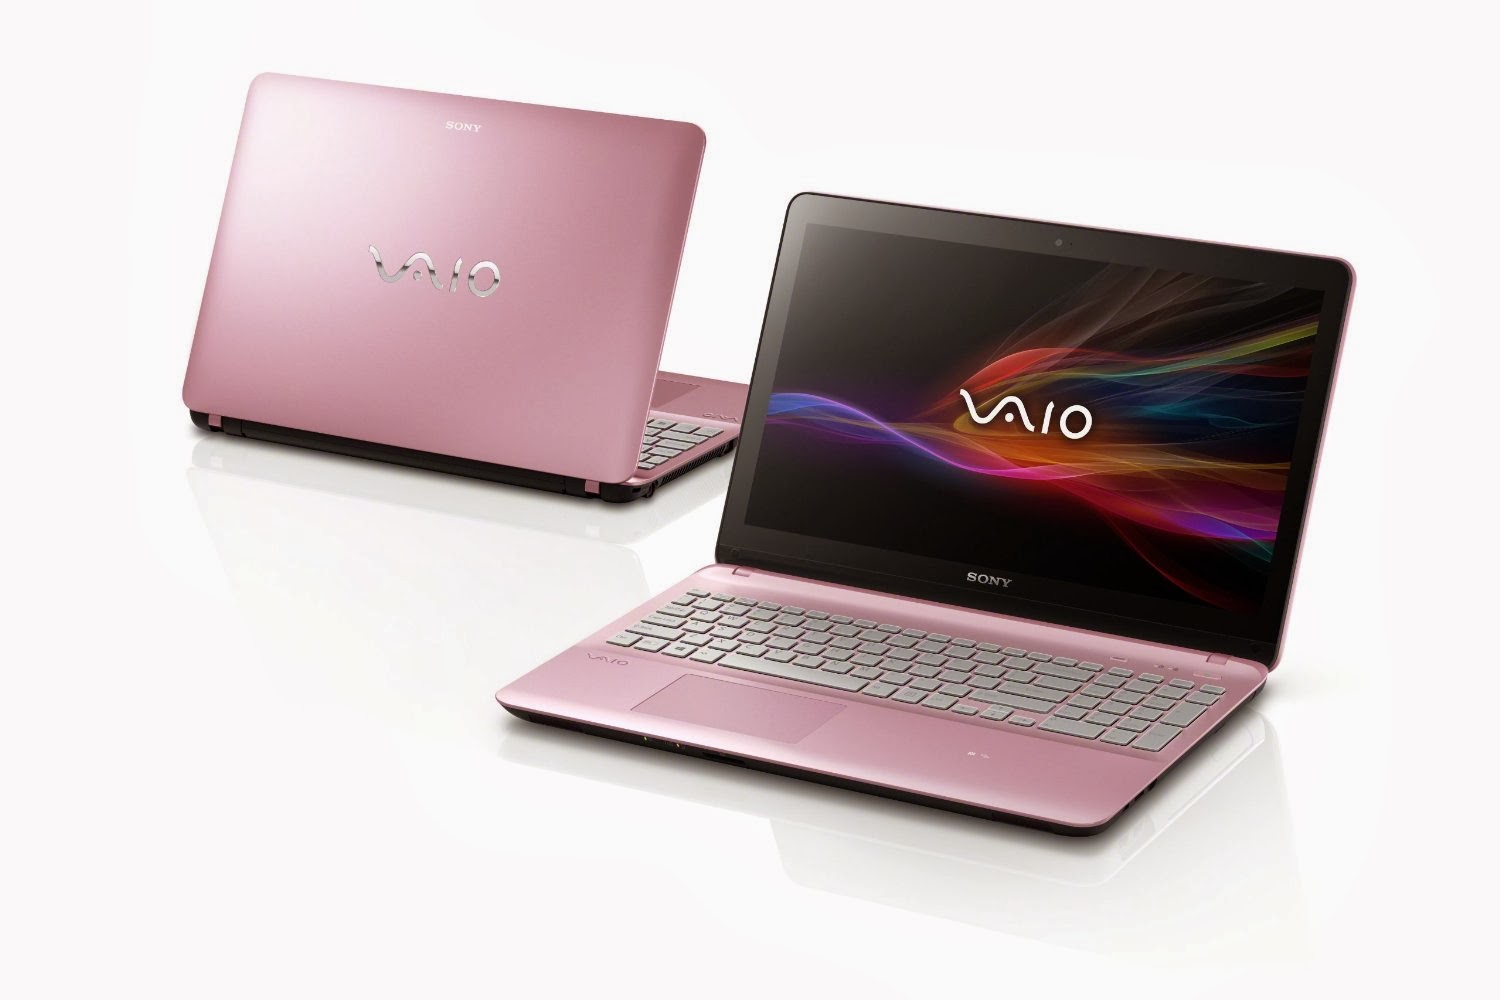 sony-laptop-discounts-2014-sony-vaio-fit-series-svf15217cxp-15-5-inch